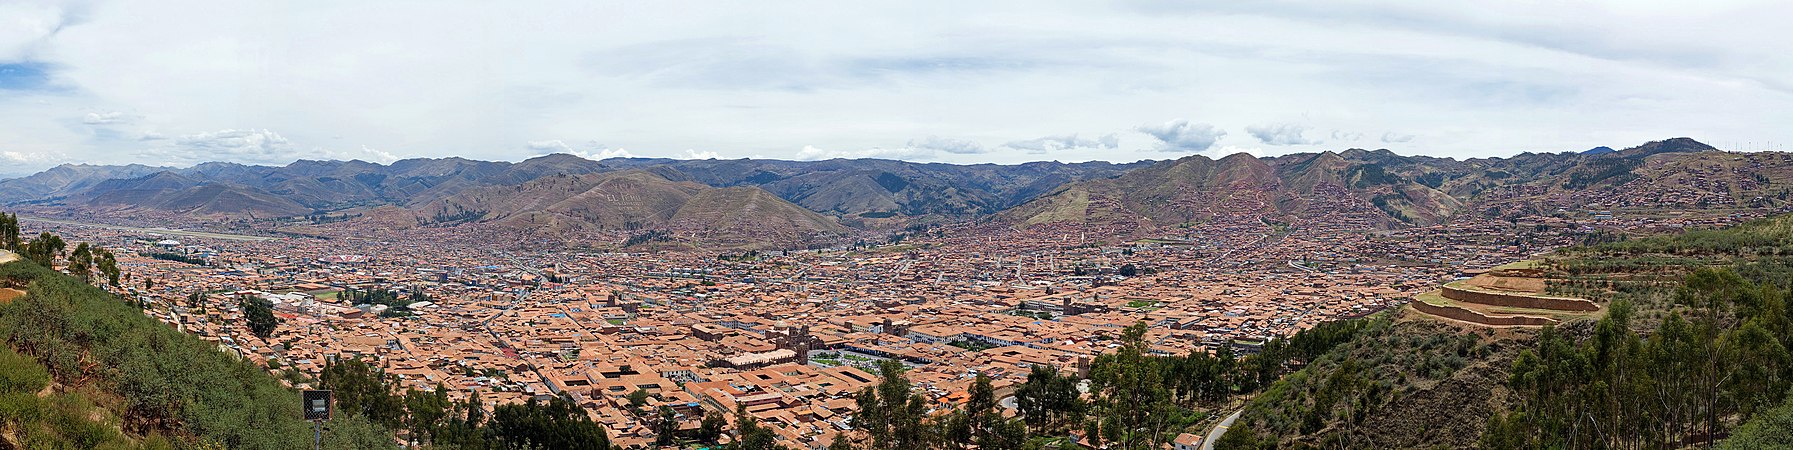 Cusco, by Cacophony (edited by Fir0002)